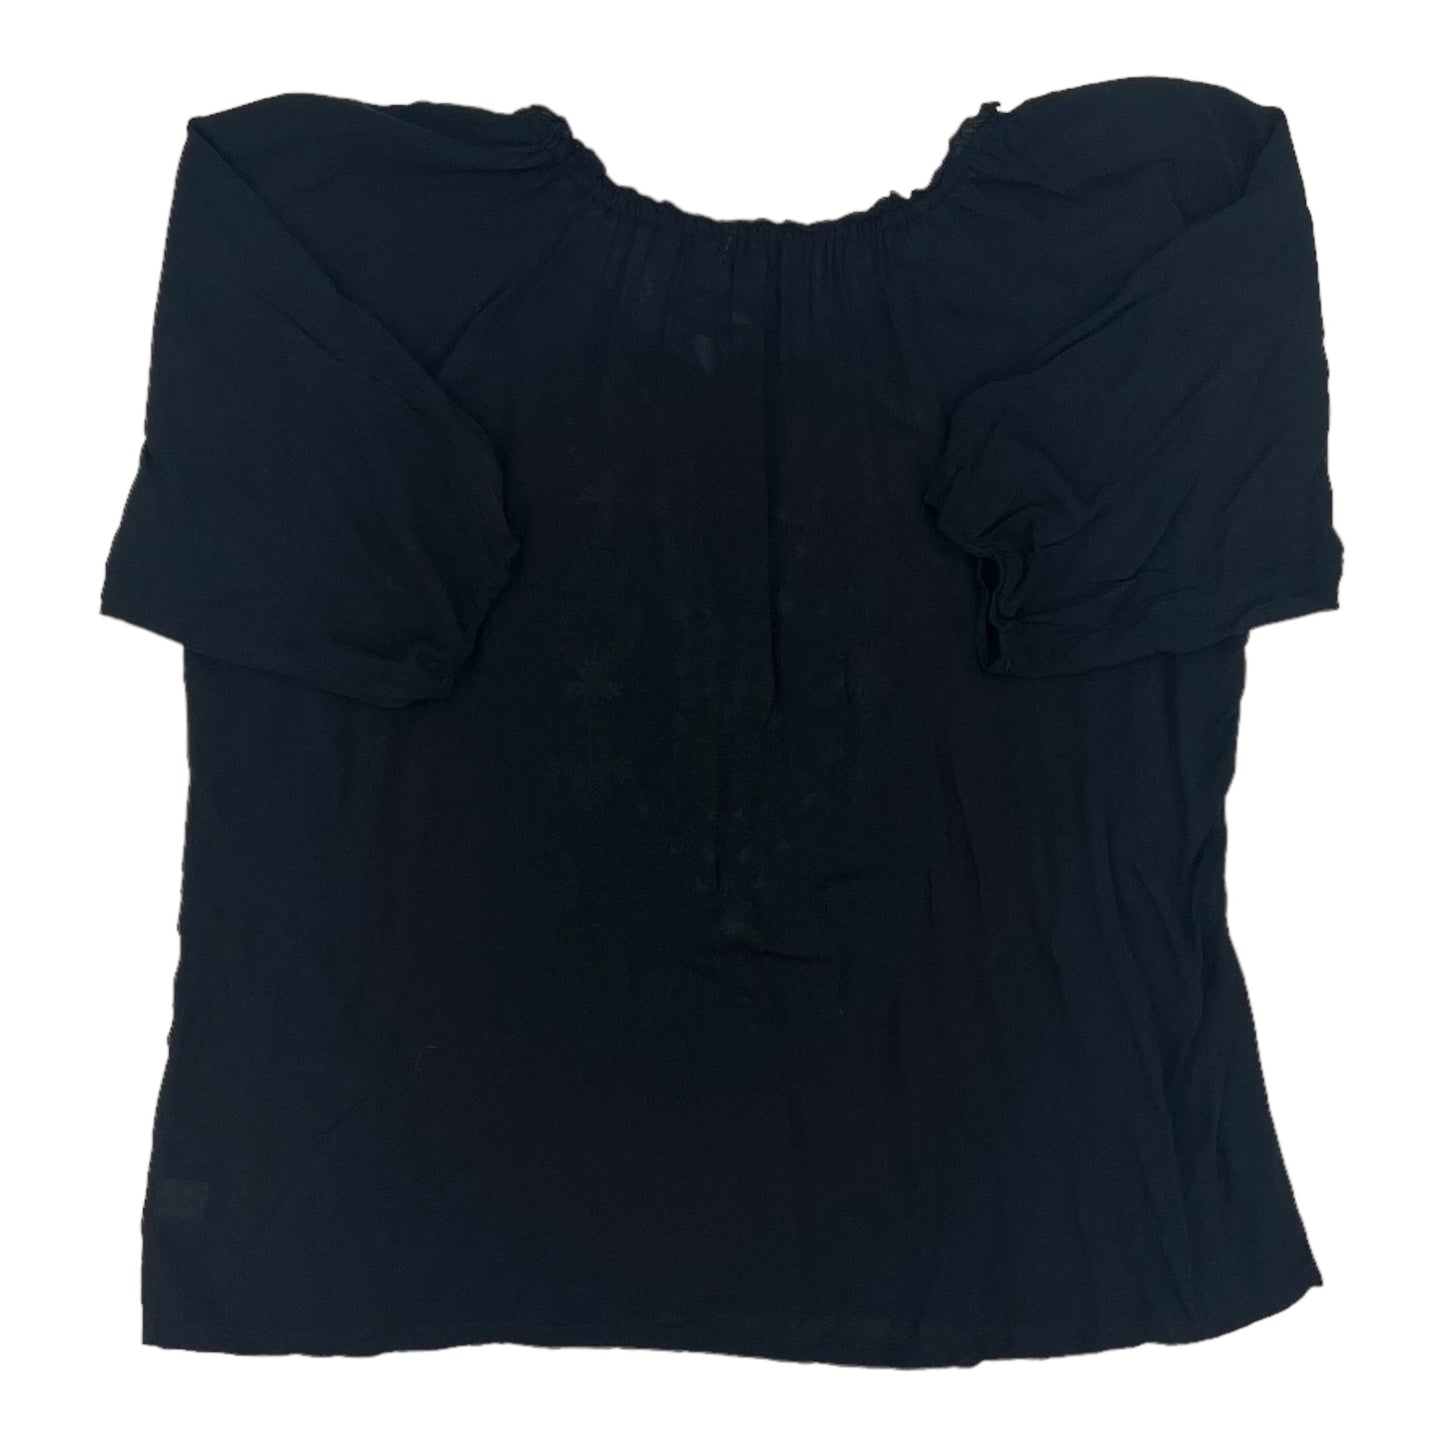 BLACK ONE WORLD TOP SS, Size 2X